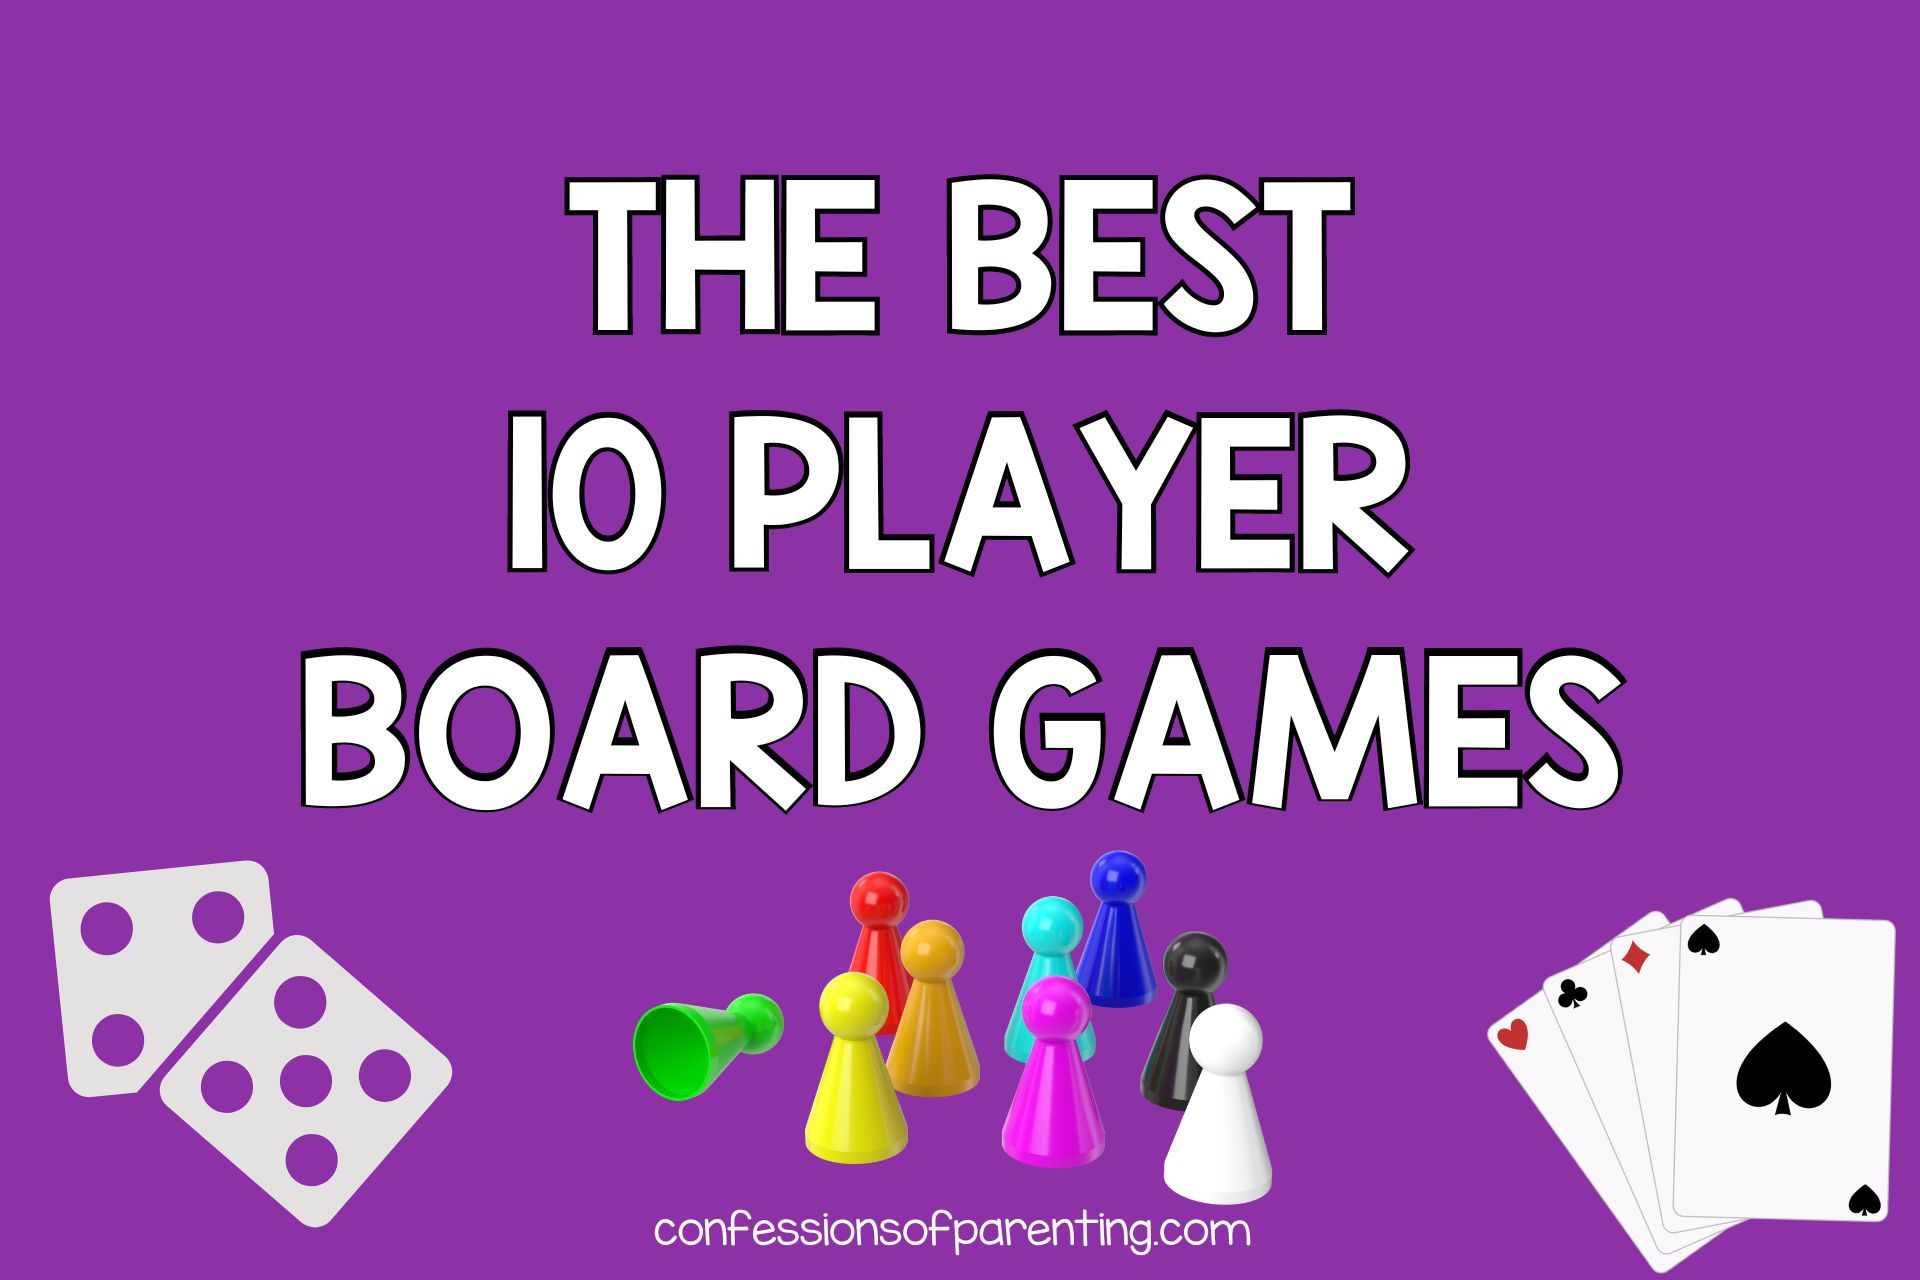 Best 10 Player Board Games That Crowds Love!